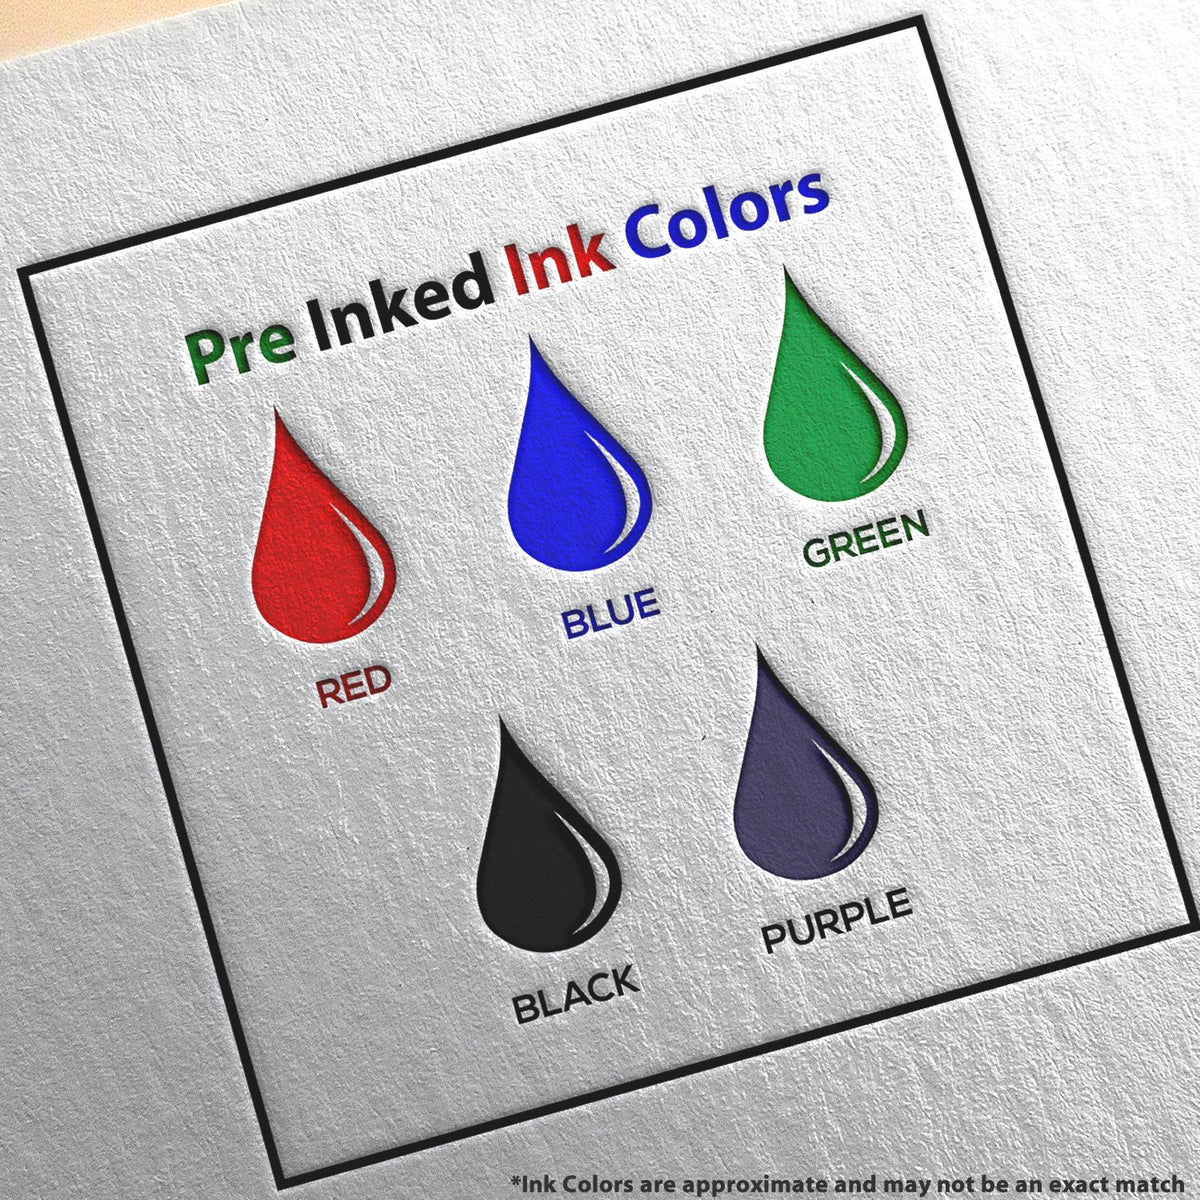 A picture showing the different ink colors or hues available for the Slim Pre-Inked Rectangular Notary Stamp for Colorado product.